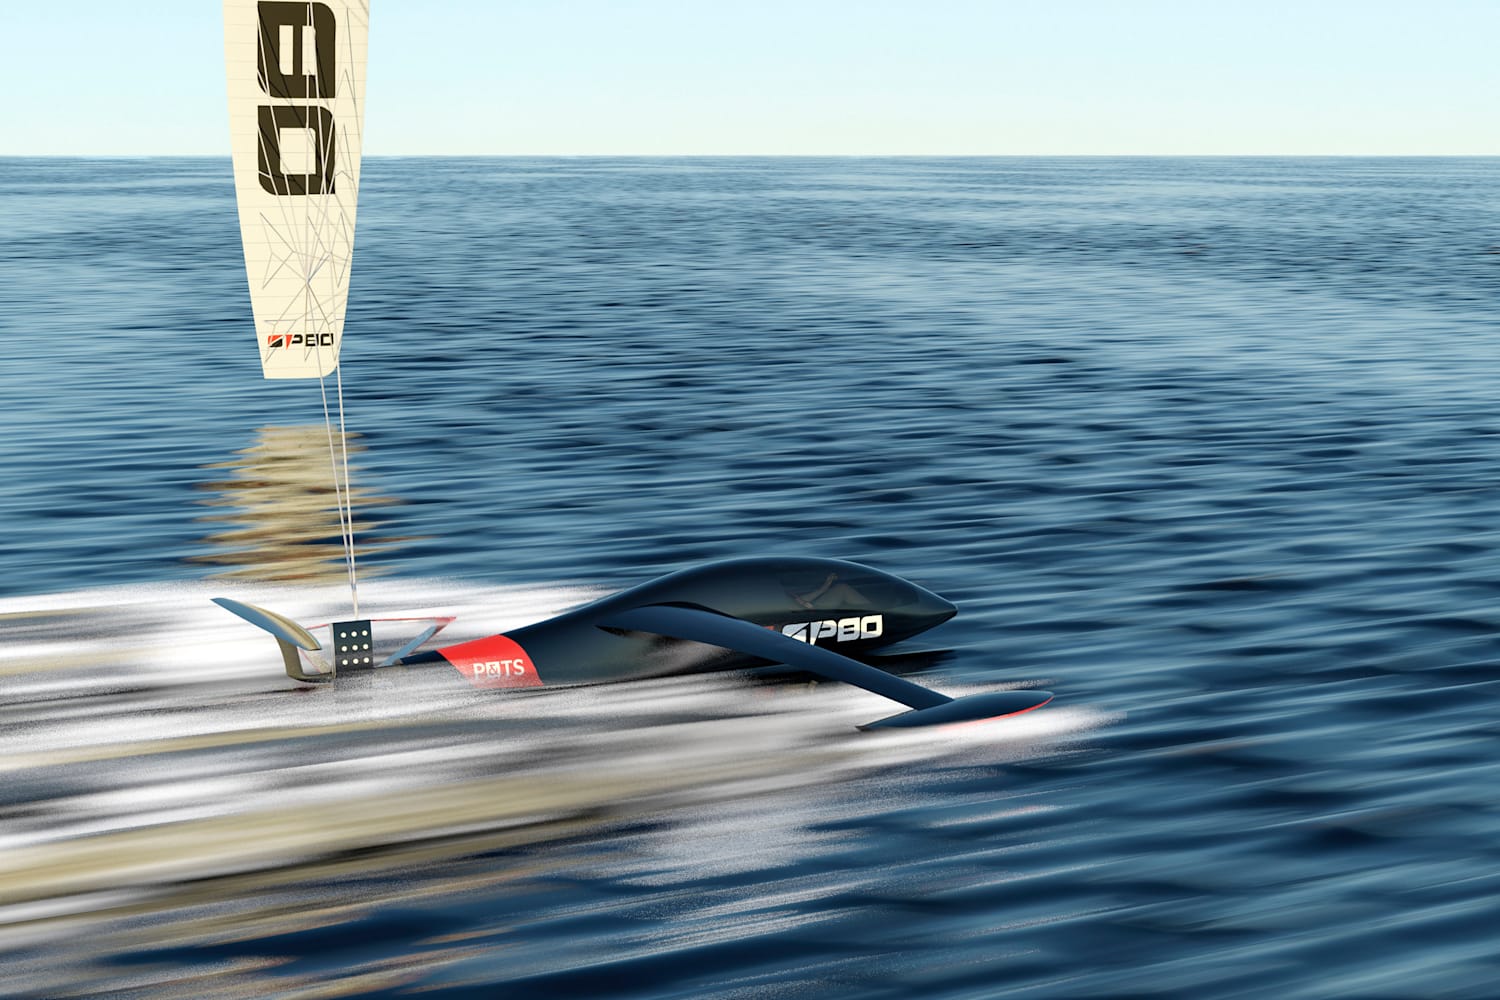 what is the world's fastest sailboat